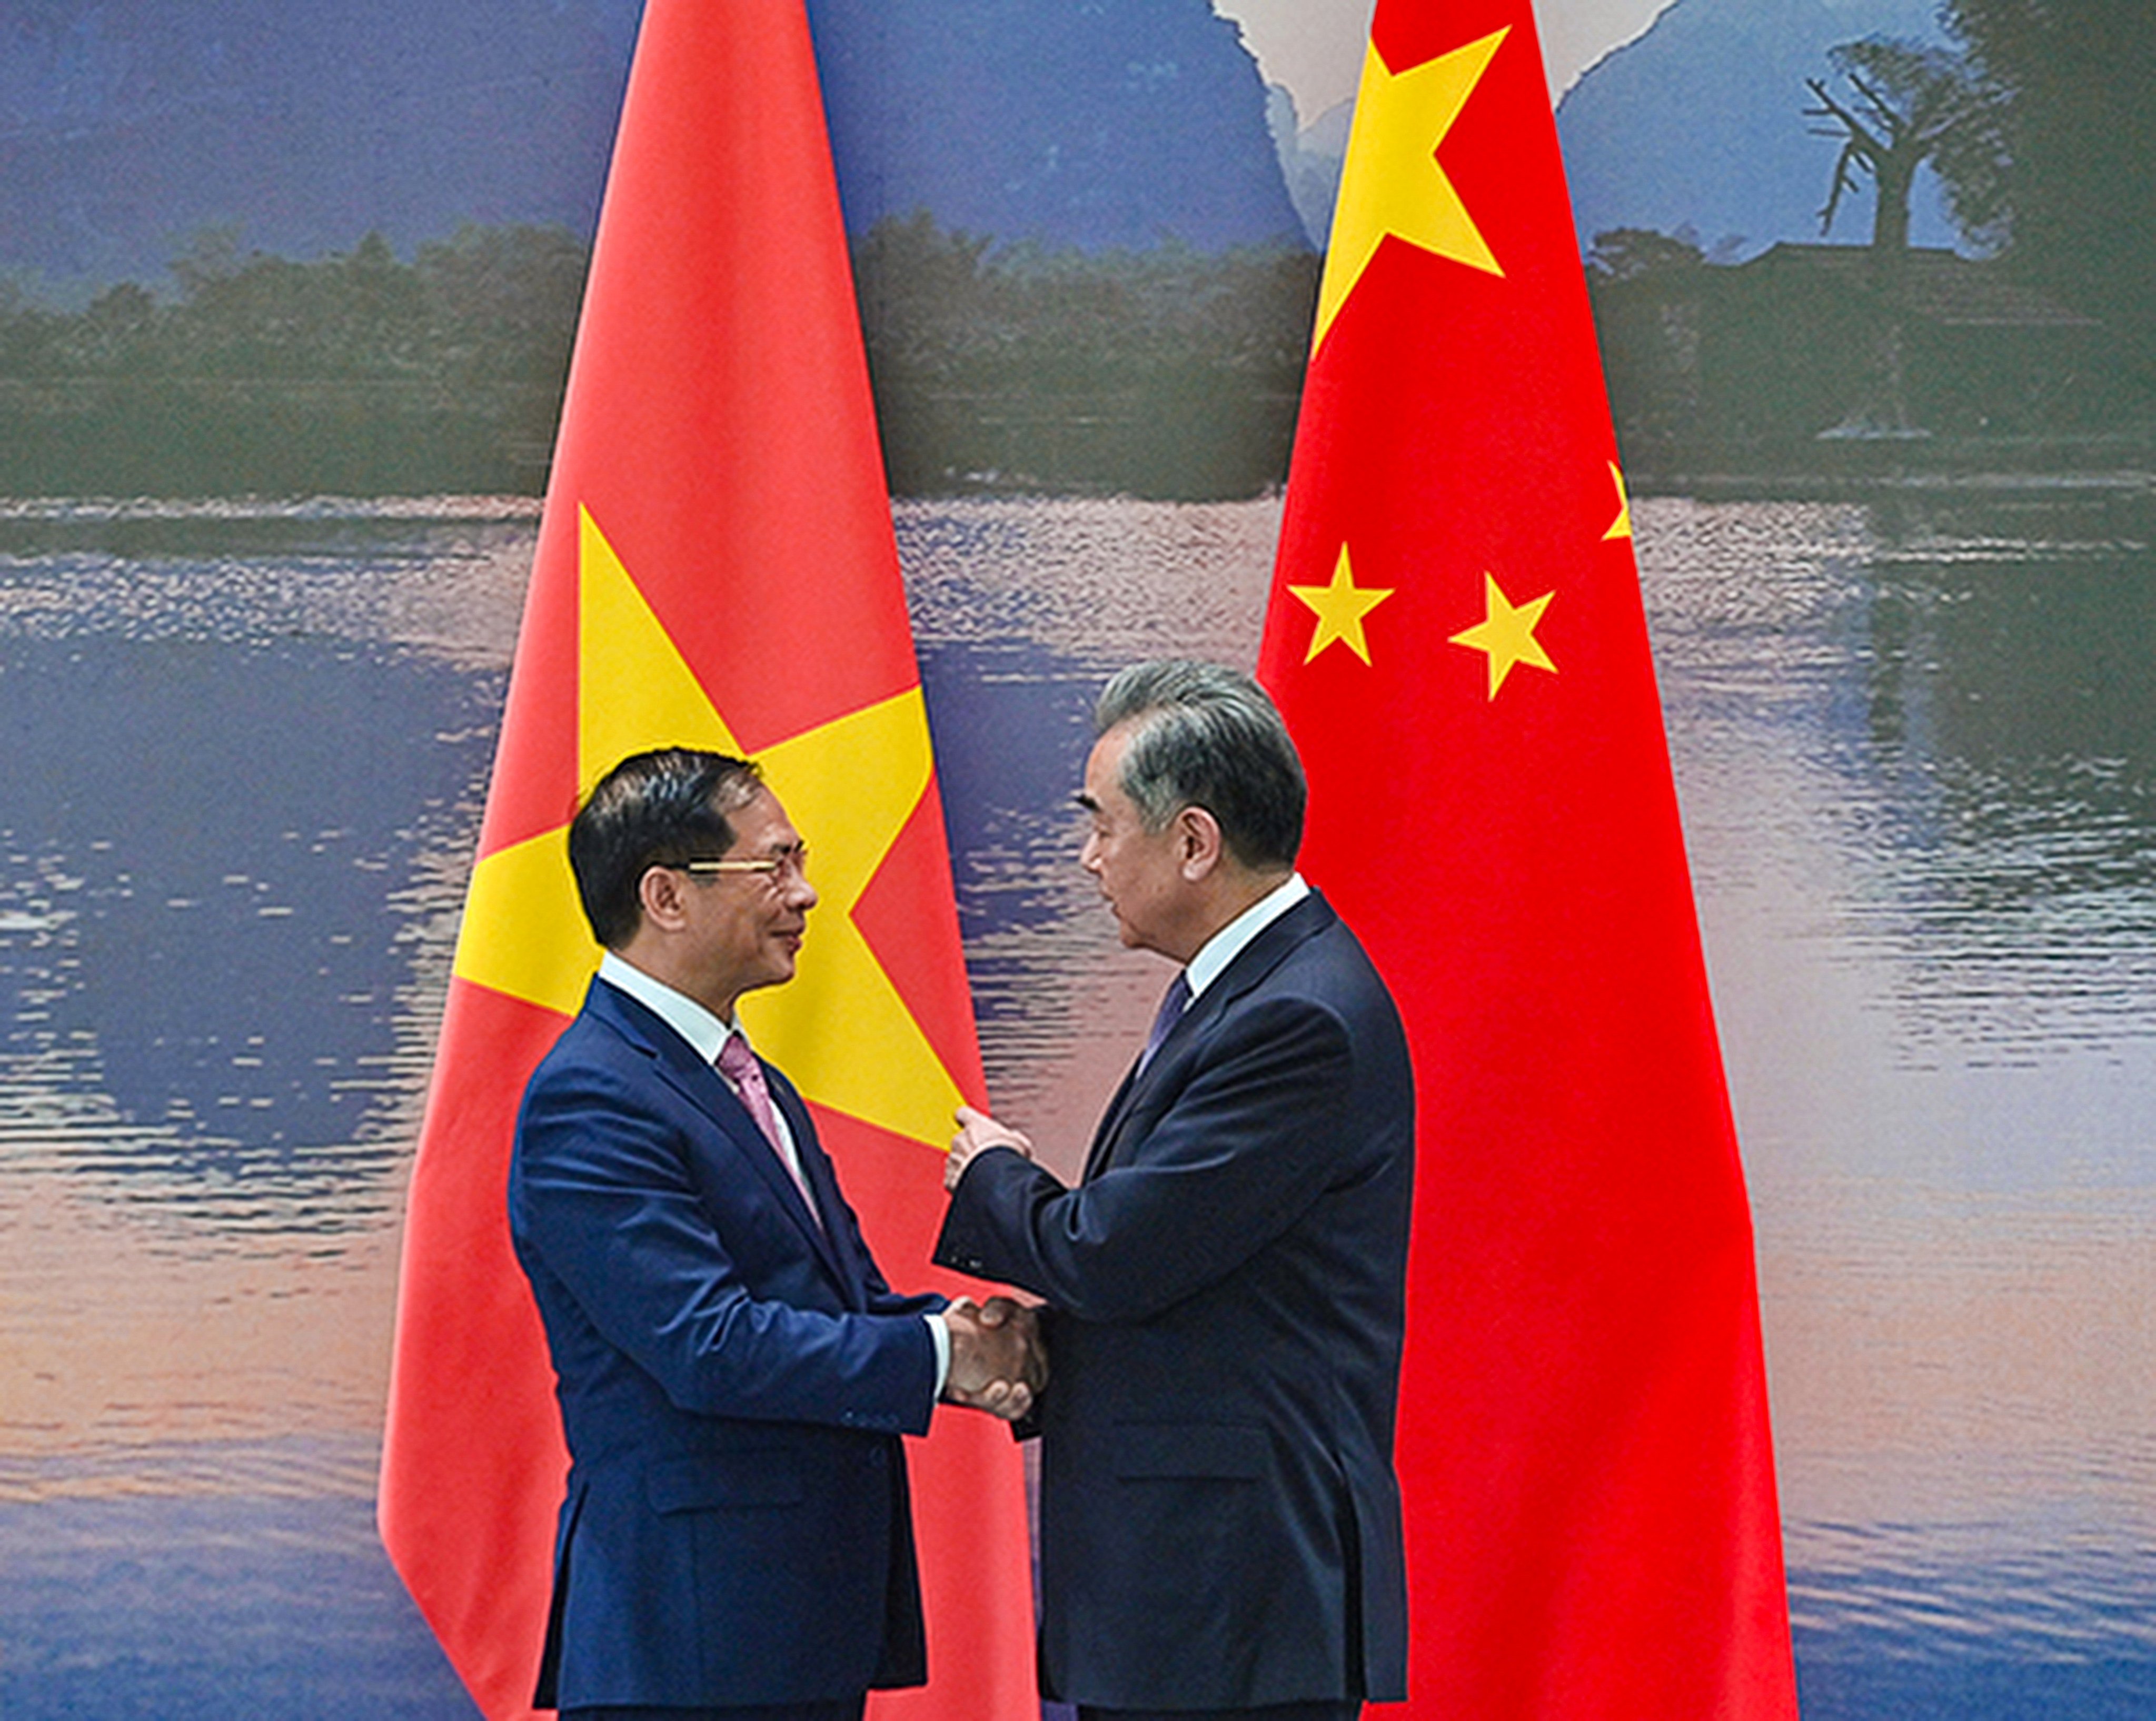 China and Vietnam should “properly manage differences” and improve maritime cooperation, Chinese Foreign Minister Wang Yi (right) told his Vietnamese counterpart Bui Thanh Son in Beijing on Thursday. Photo: Chinese Ministry of Foreign Affairs